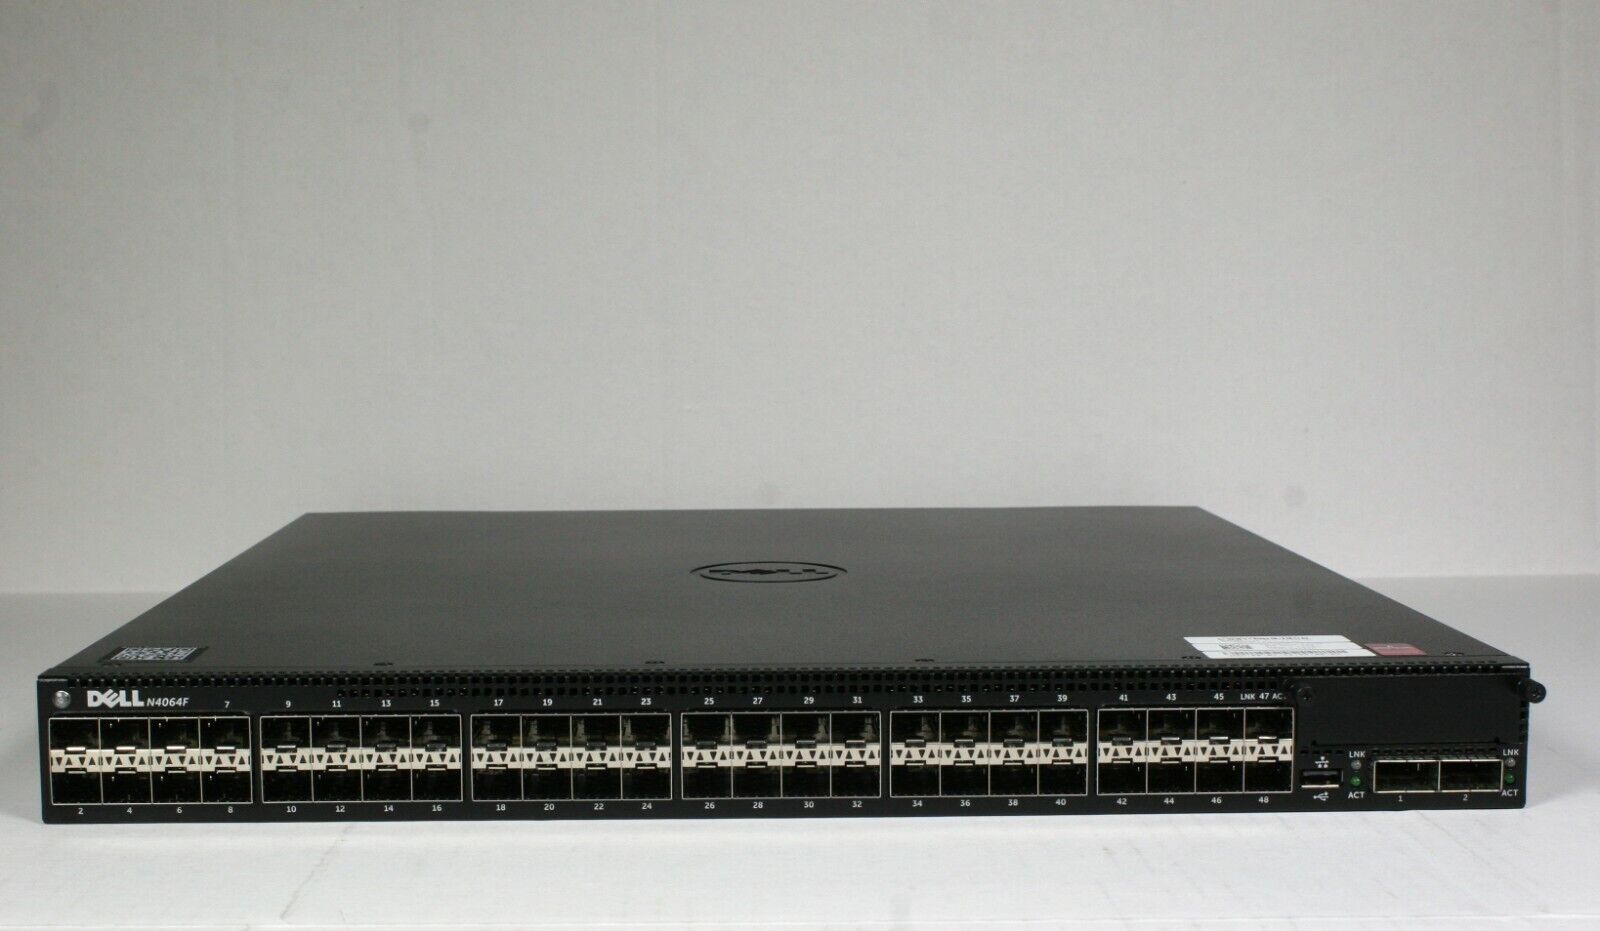 Dell networking 8164F 48 port 10GbE SFP+ Ethernet Layer 3 switch  dual PSU